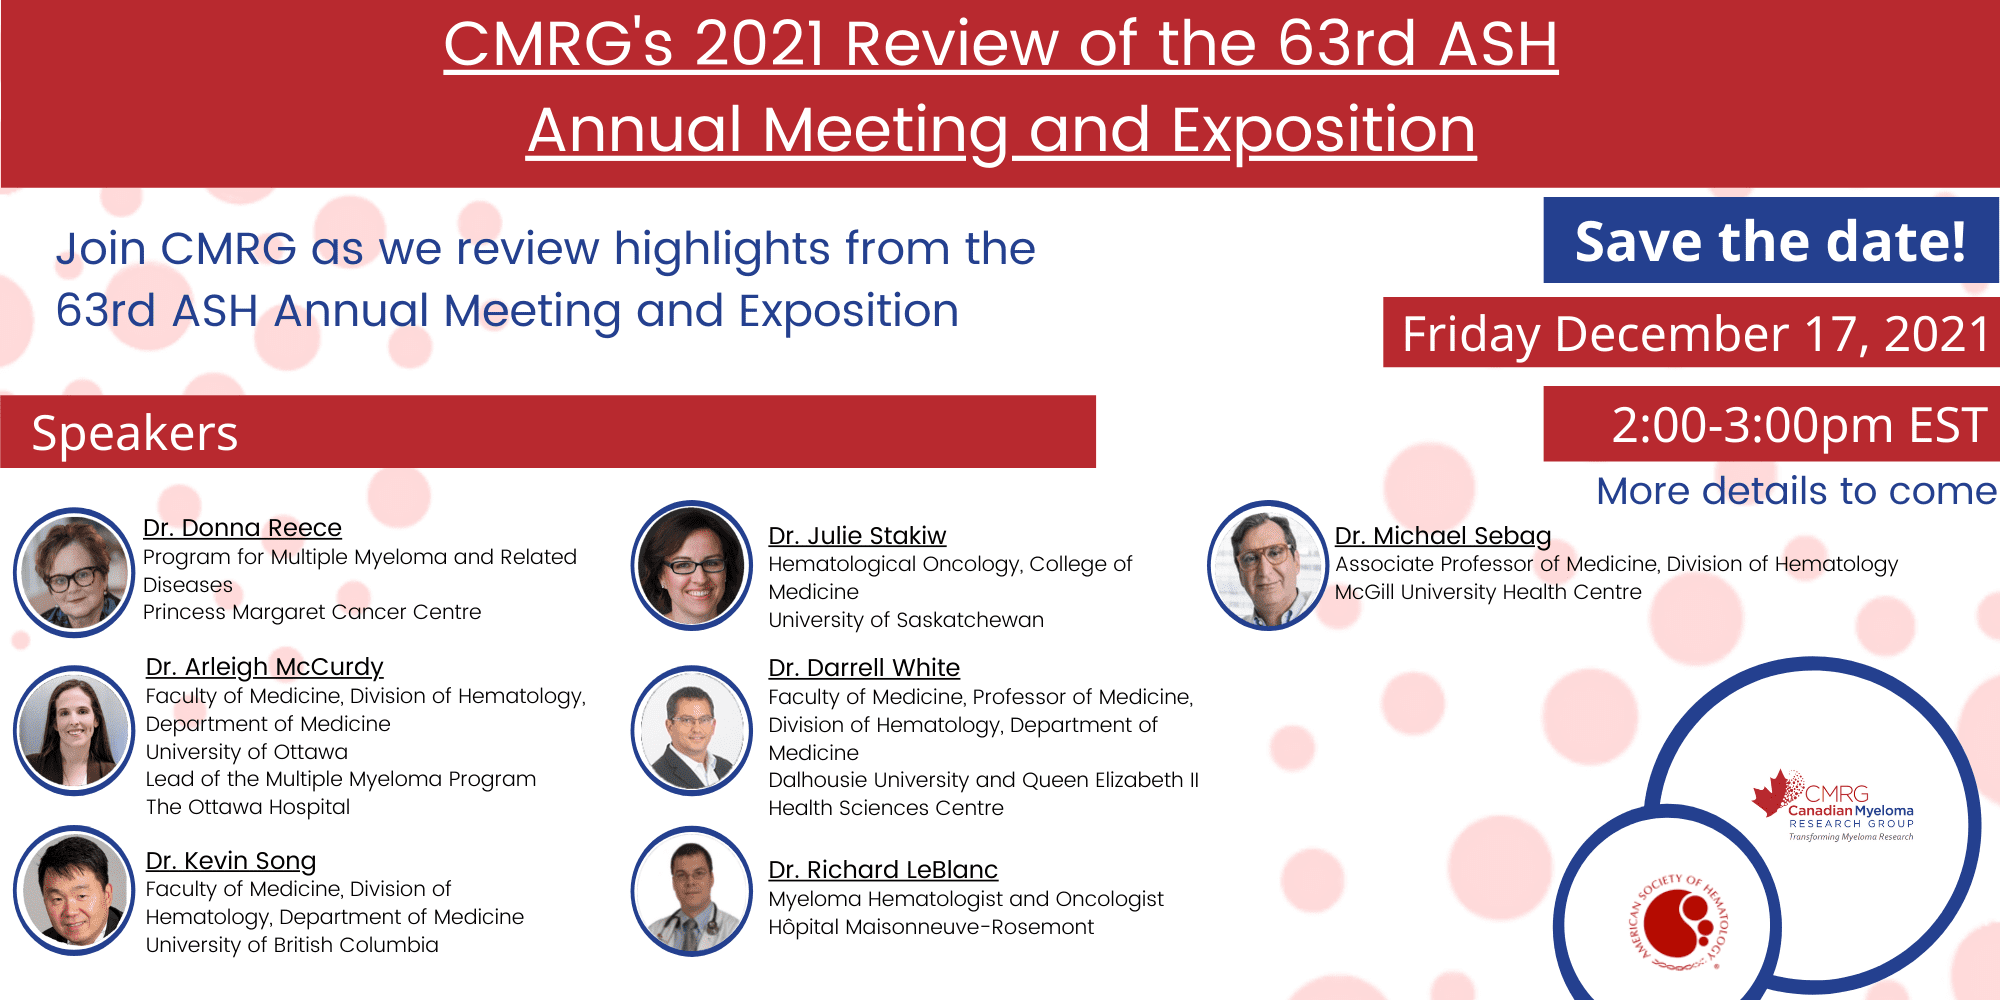 CMRG’s Review of the 63rd Annual ASH Meeting and Exposition